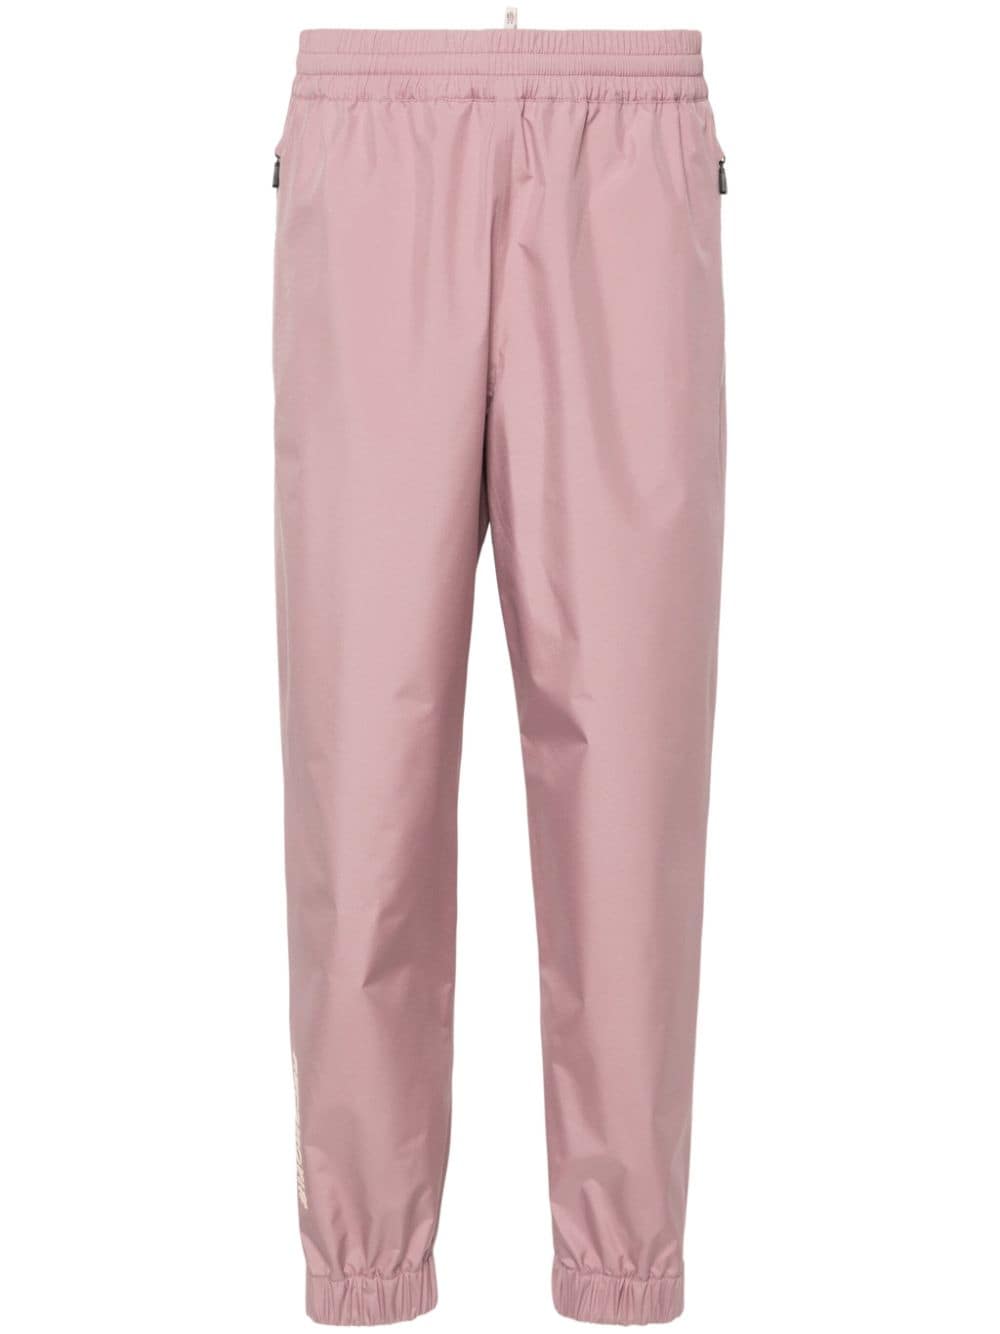 Gore-Tex pink pants<BR/>Moncler Grenoble Collection